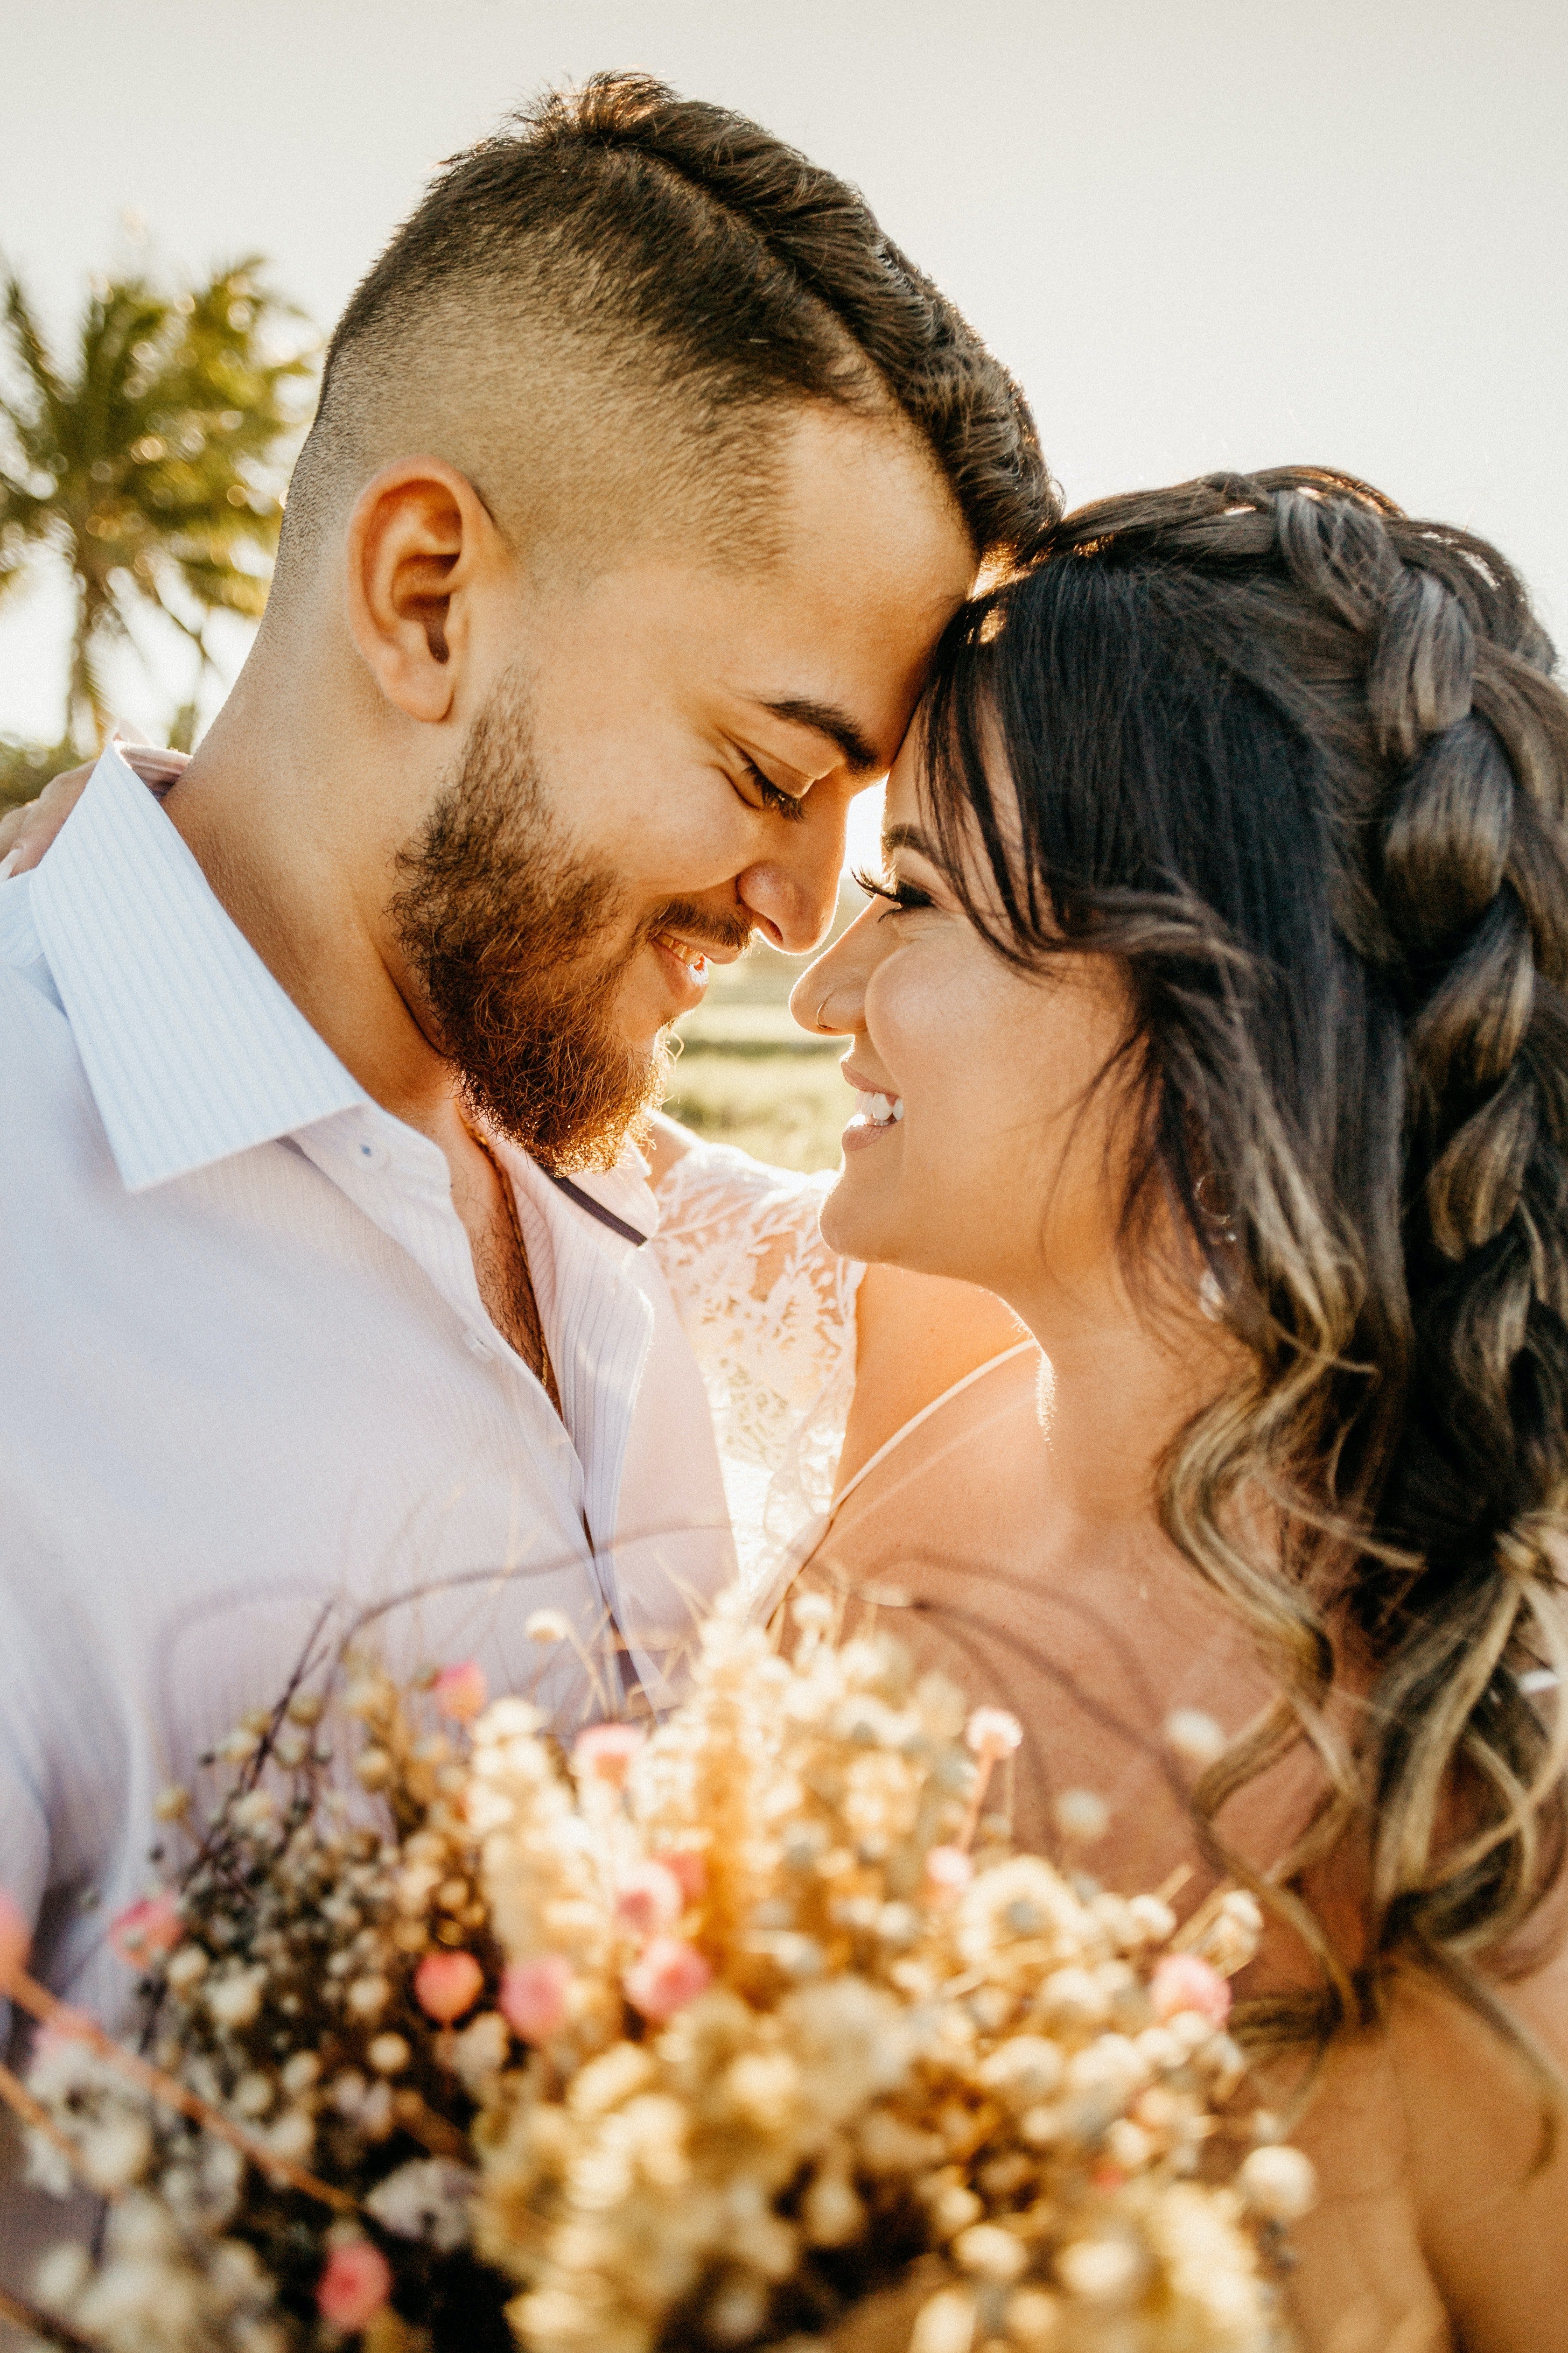 Pictured - A newly wedded couple glaring into each other's eyes while smiling and embracing each other on the beach on their wedding day. | Source: Pexels 